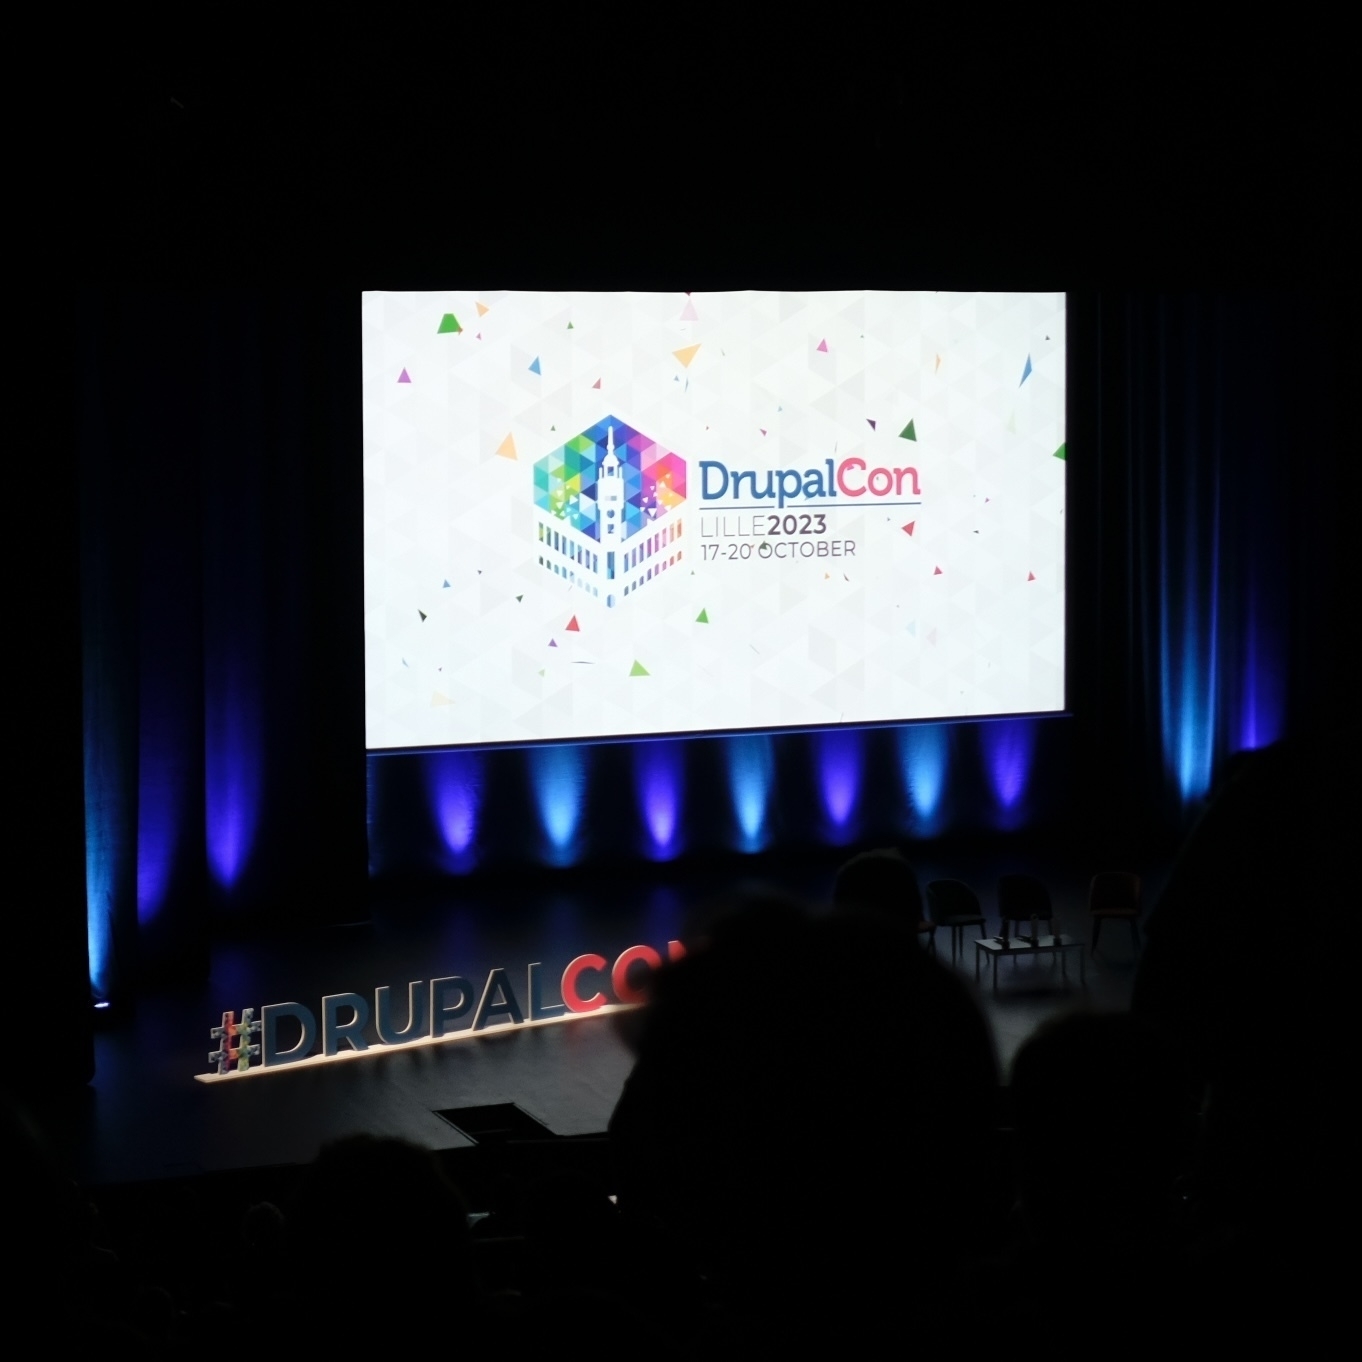 The Drupalcon stage with the opening slide on the screen